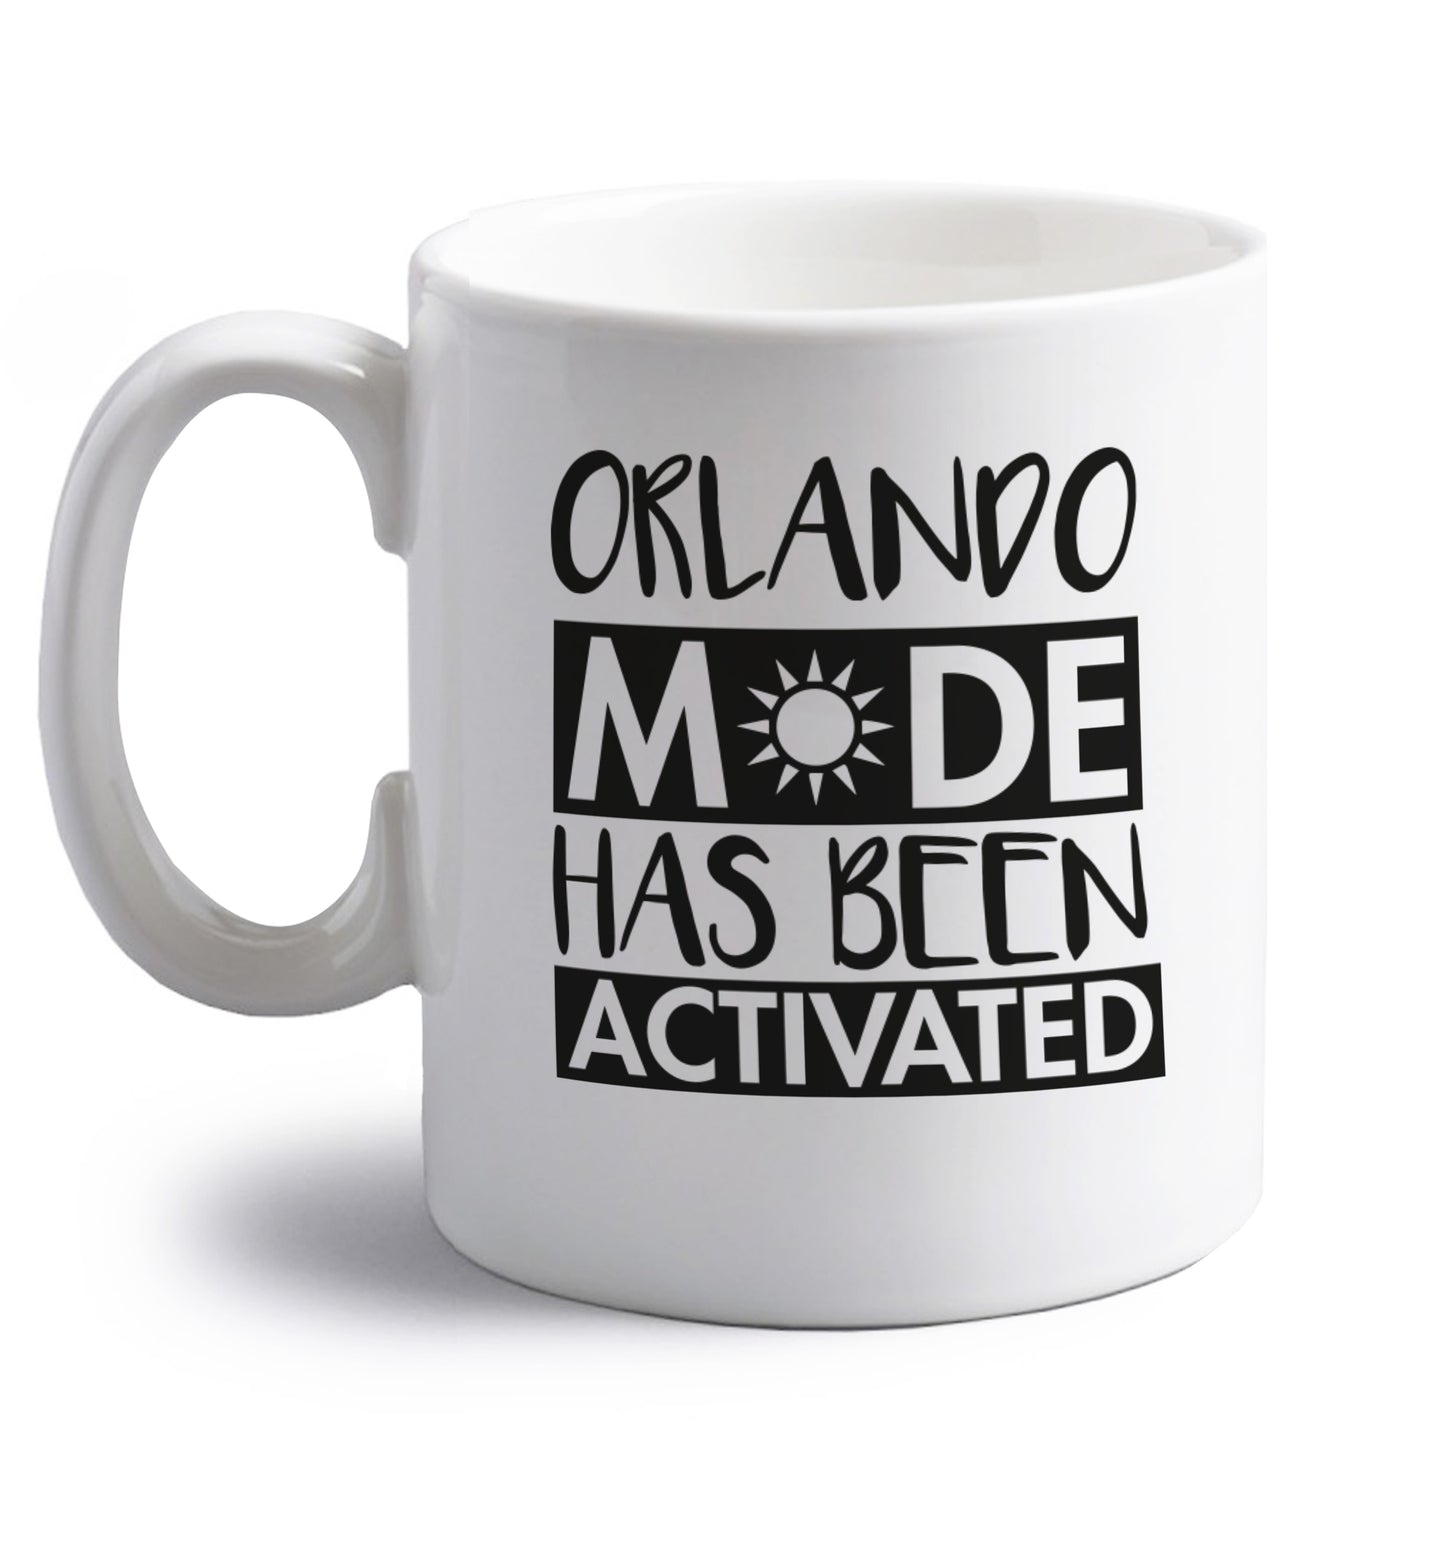 Orlando mode has been activated right handed white ceramic mug 